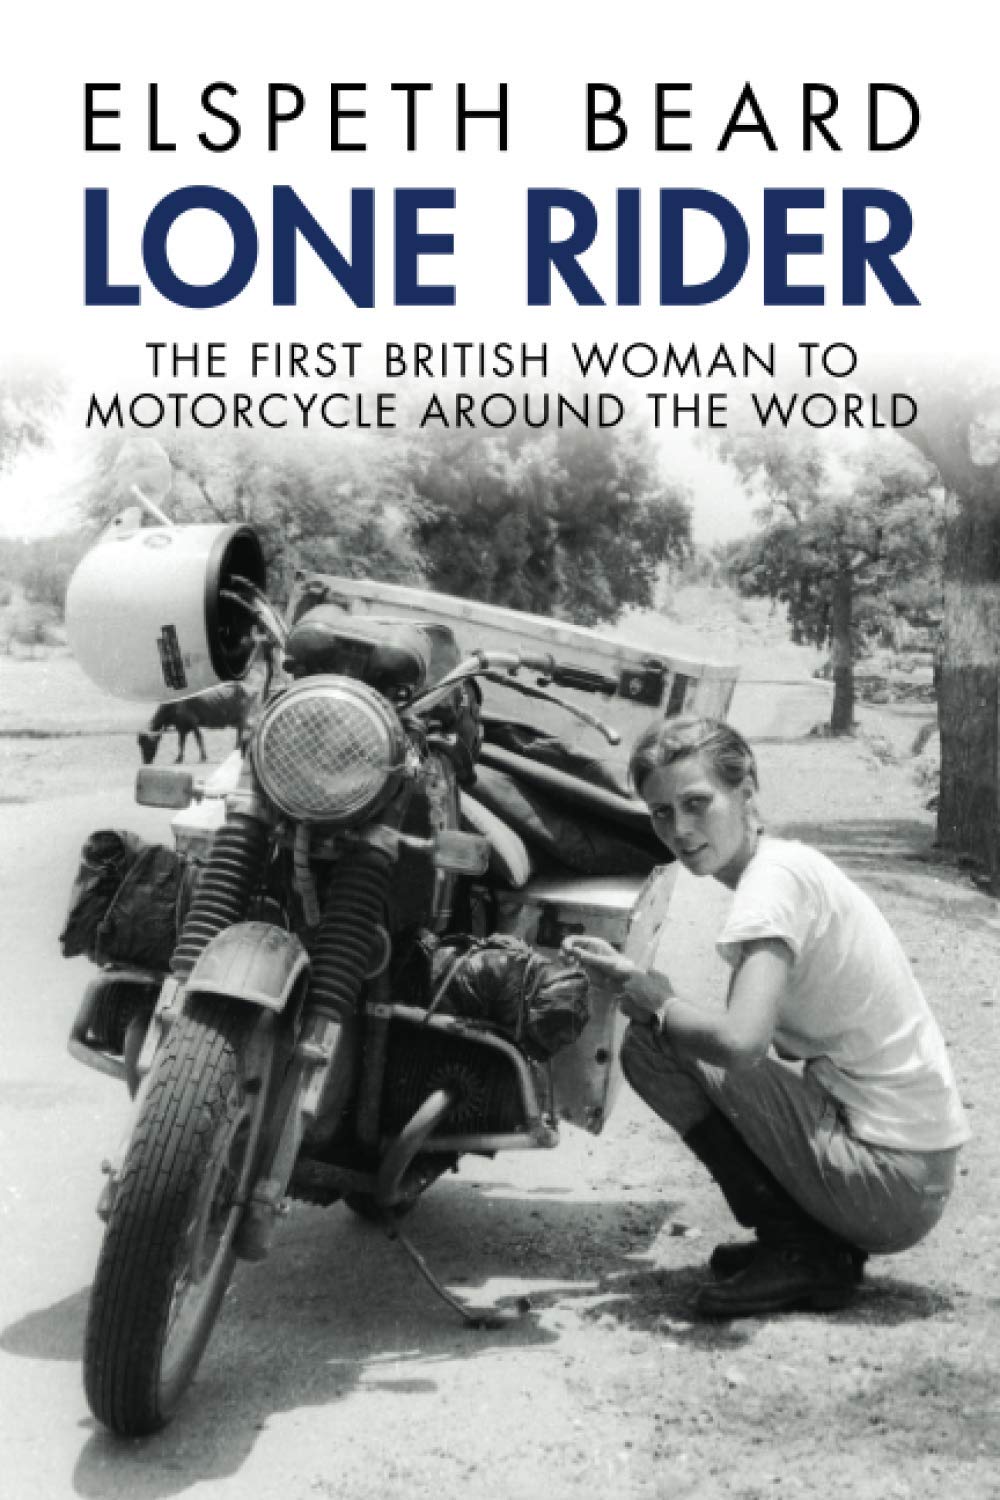 Lone Rider: The First British Woman to Motorcycle Around the World Paperback – June 18, 2018